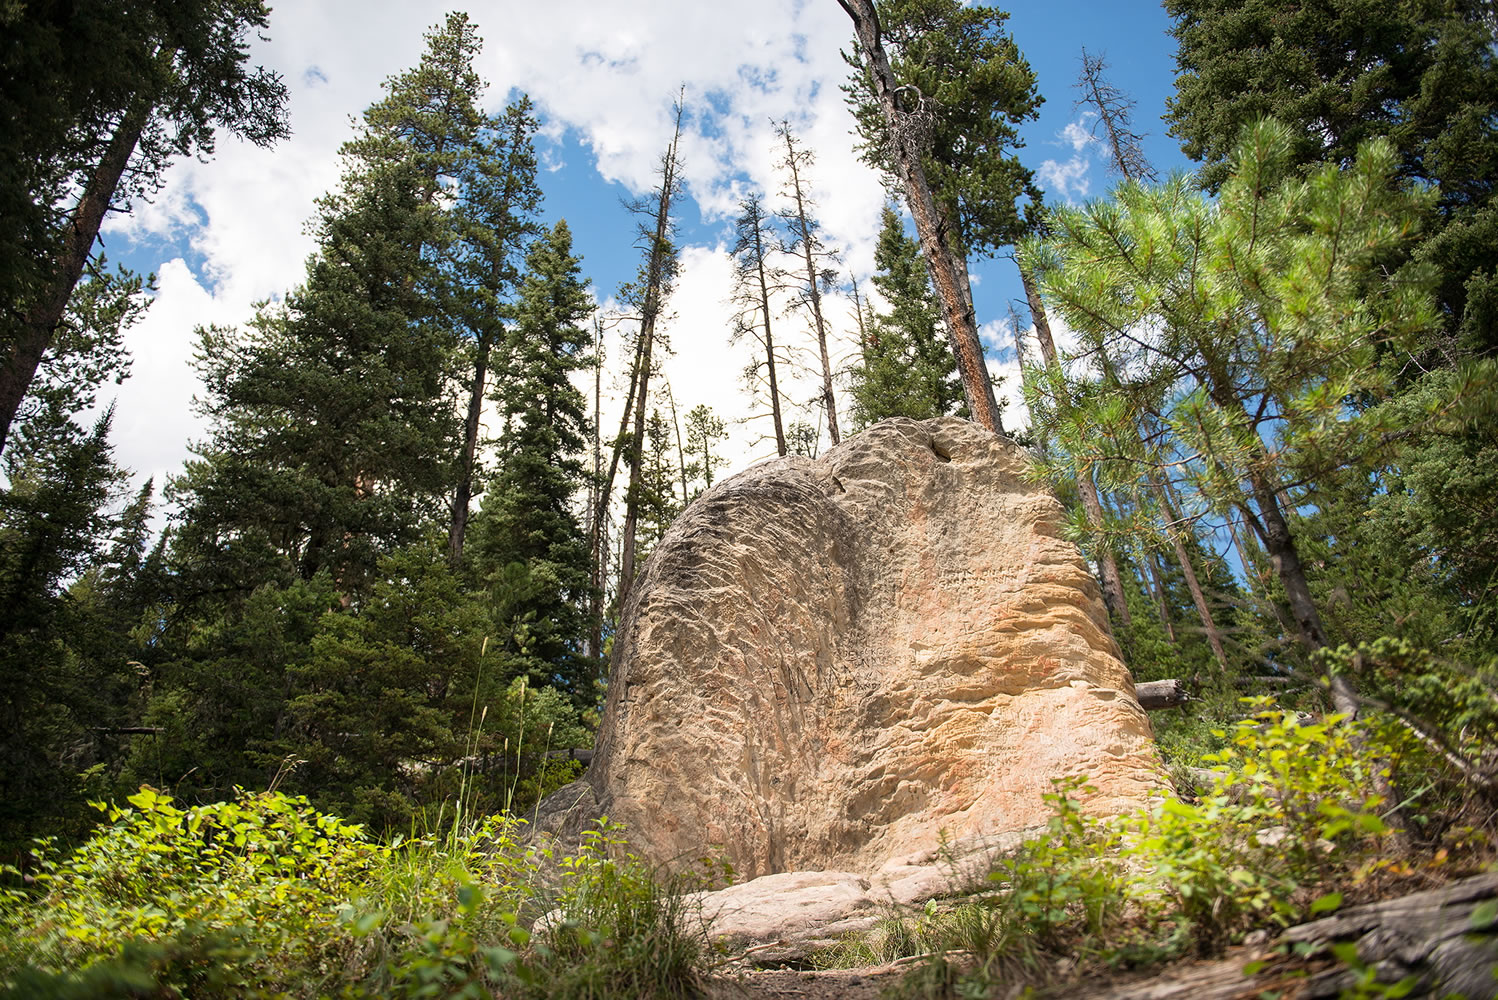 History Rock rises from the forest floor in Hyalite Canyon south of Bozeman, Mont.  Of all the great day hikes in Hyalite Canyon, the 2.4-mile round trip route to History Rock is one of the finest.